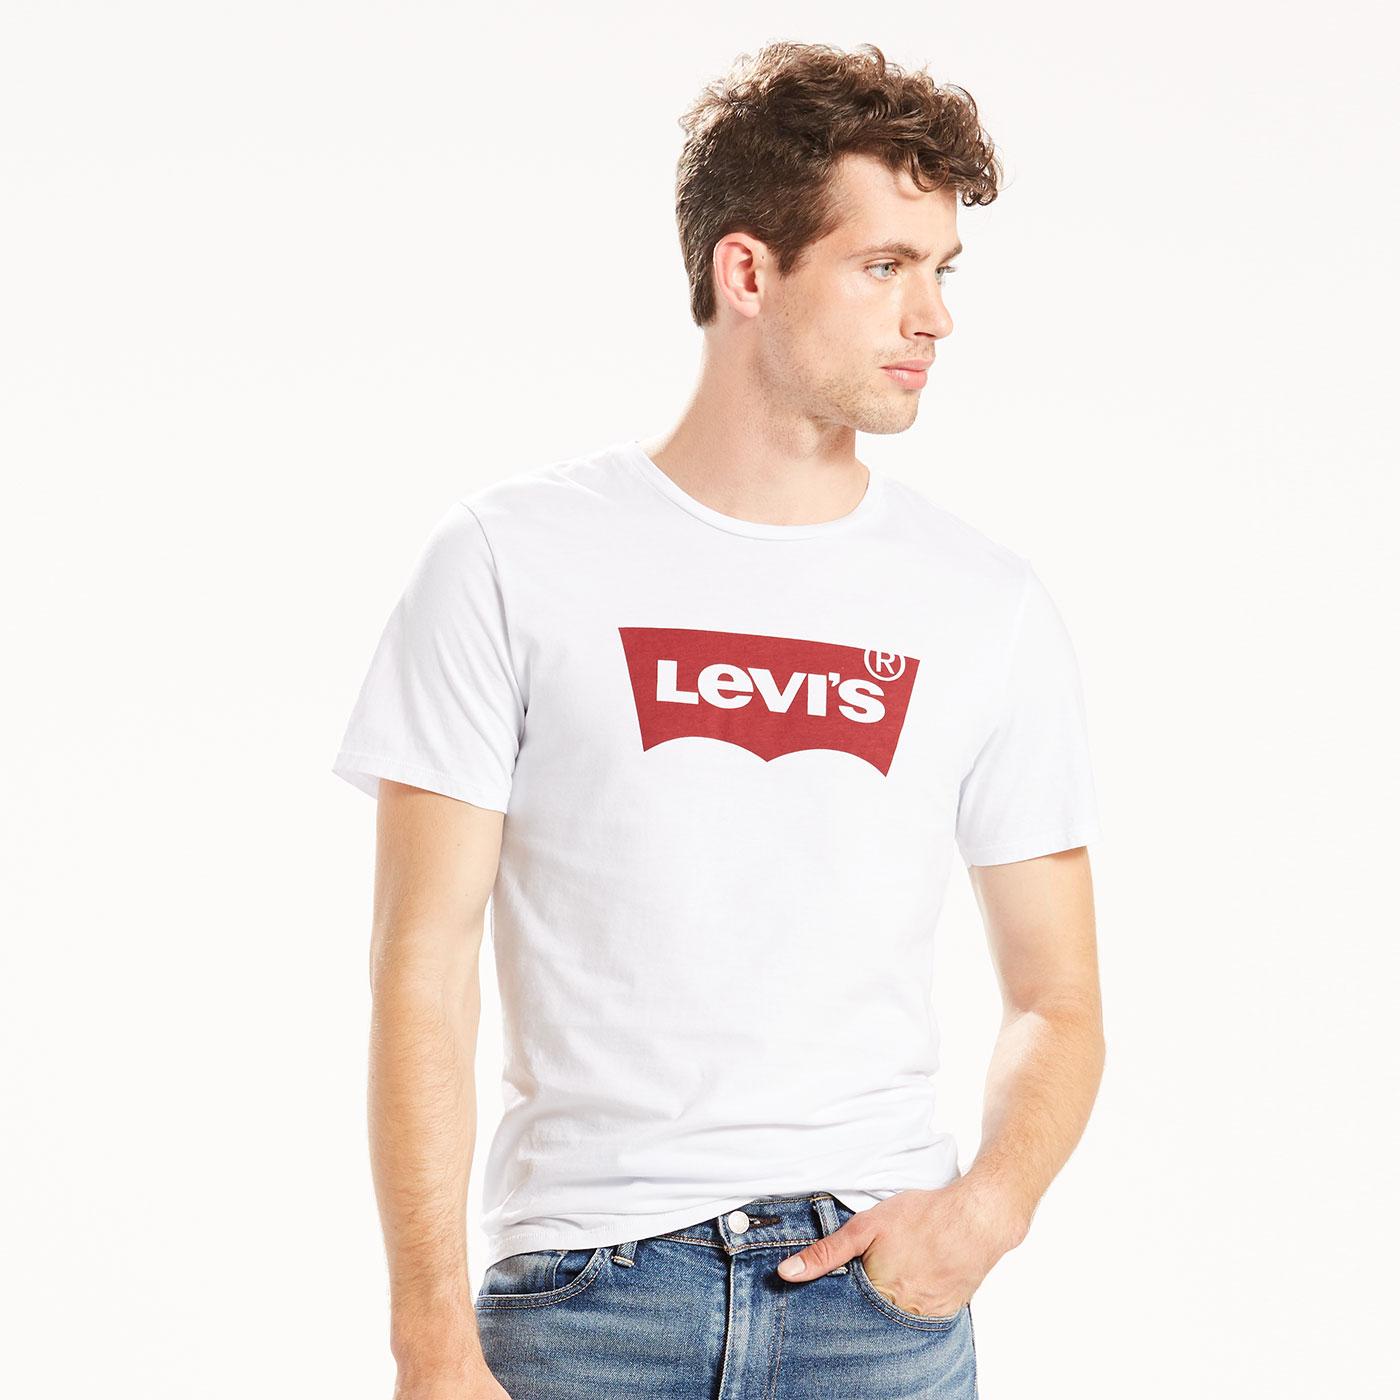 LEVI'S® Retro Mod Indie Classic Batwing Logo T-Shirt in White